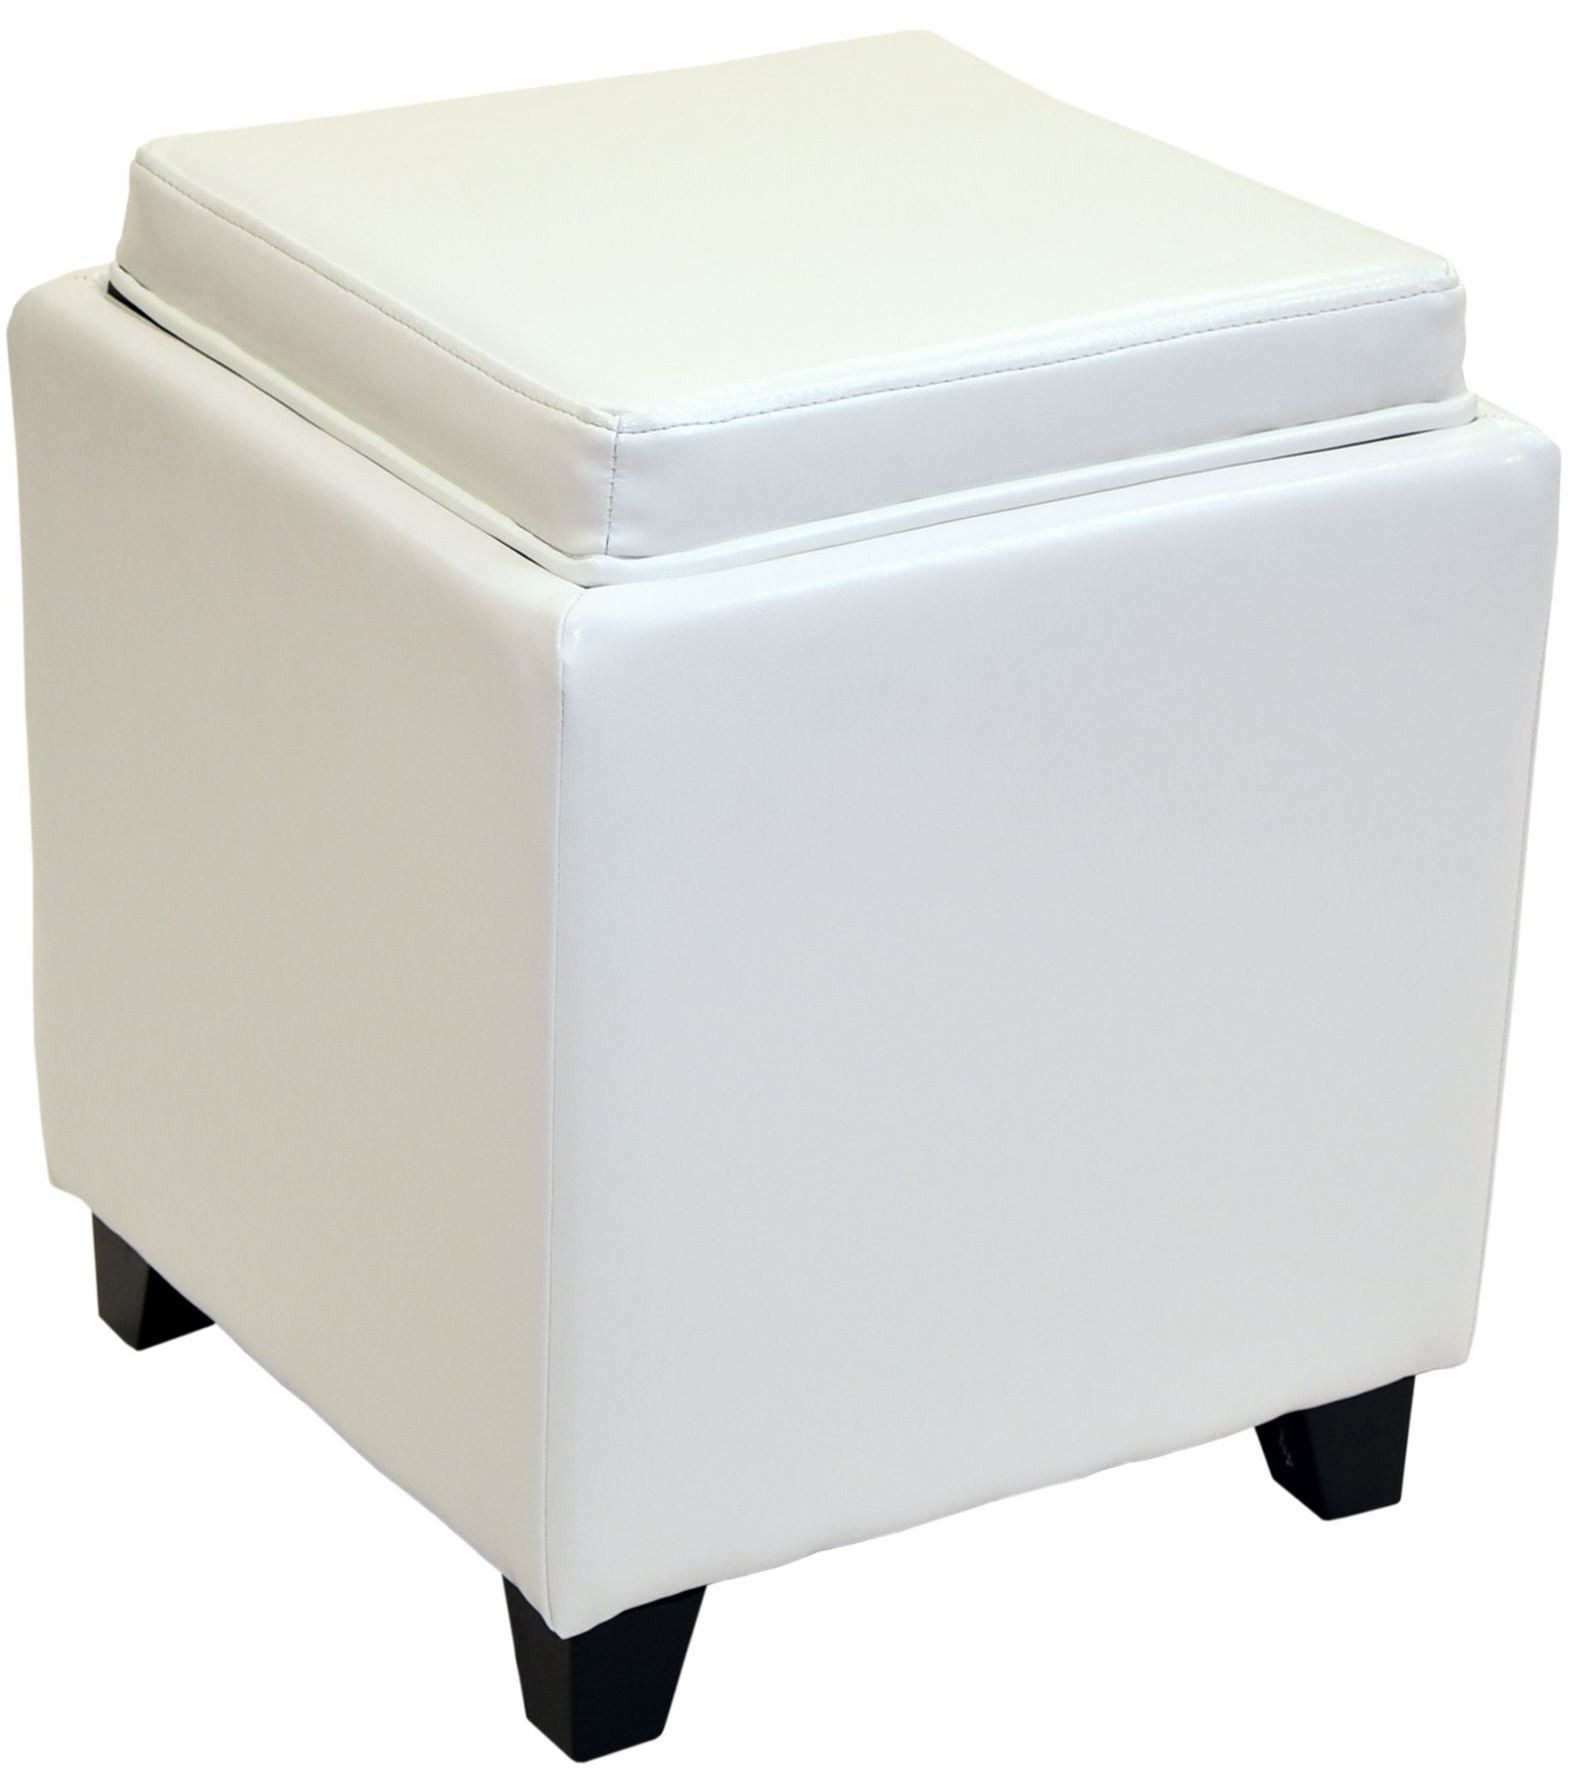 Rainbow White Bonded Leather Storage Ottoman With Tray, Lc530otlewh For White Leatherette Ottomans (View 17 of 20)